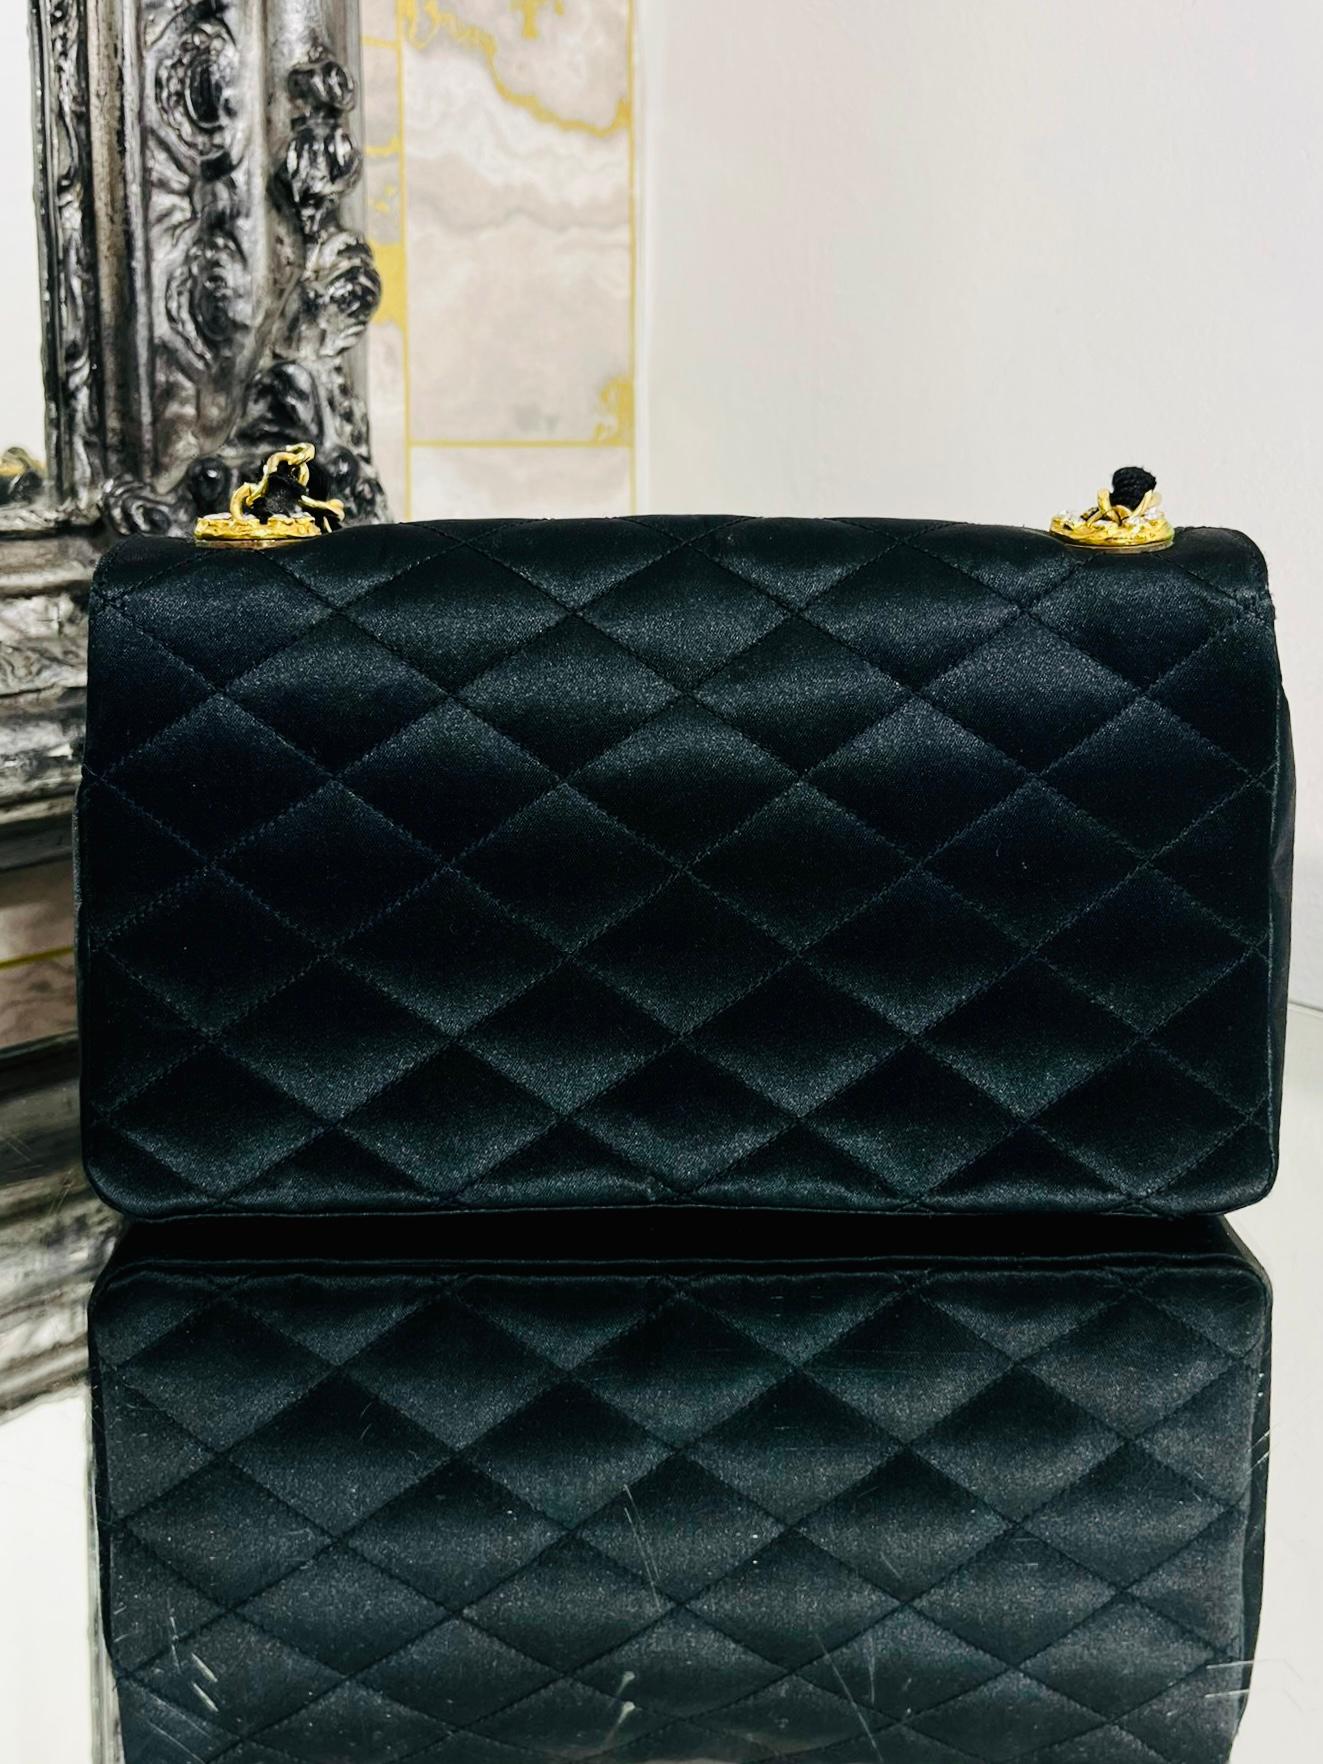 Women's Chanel Vintage Satin Quilted Timeless Bag For Sale